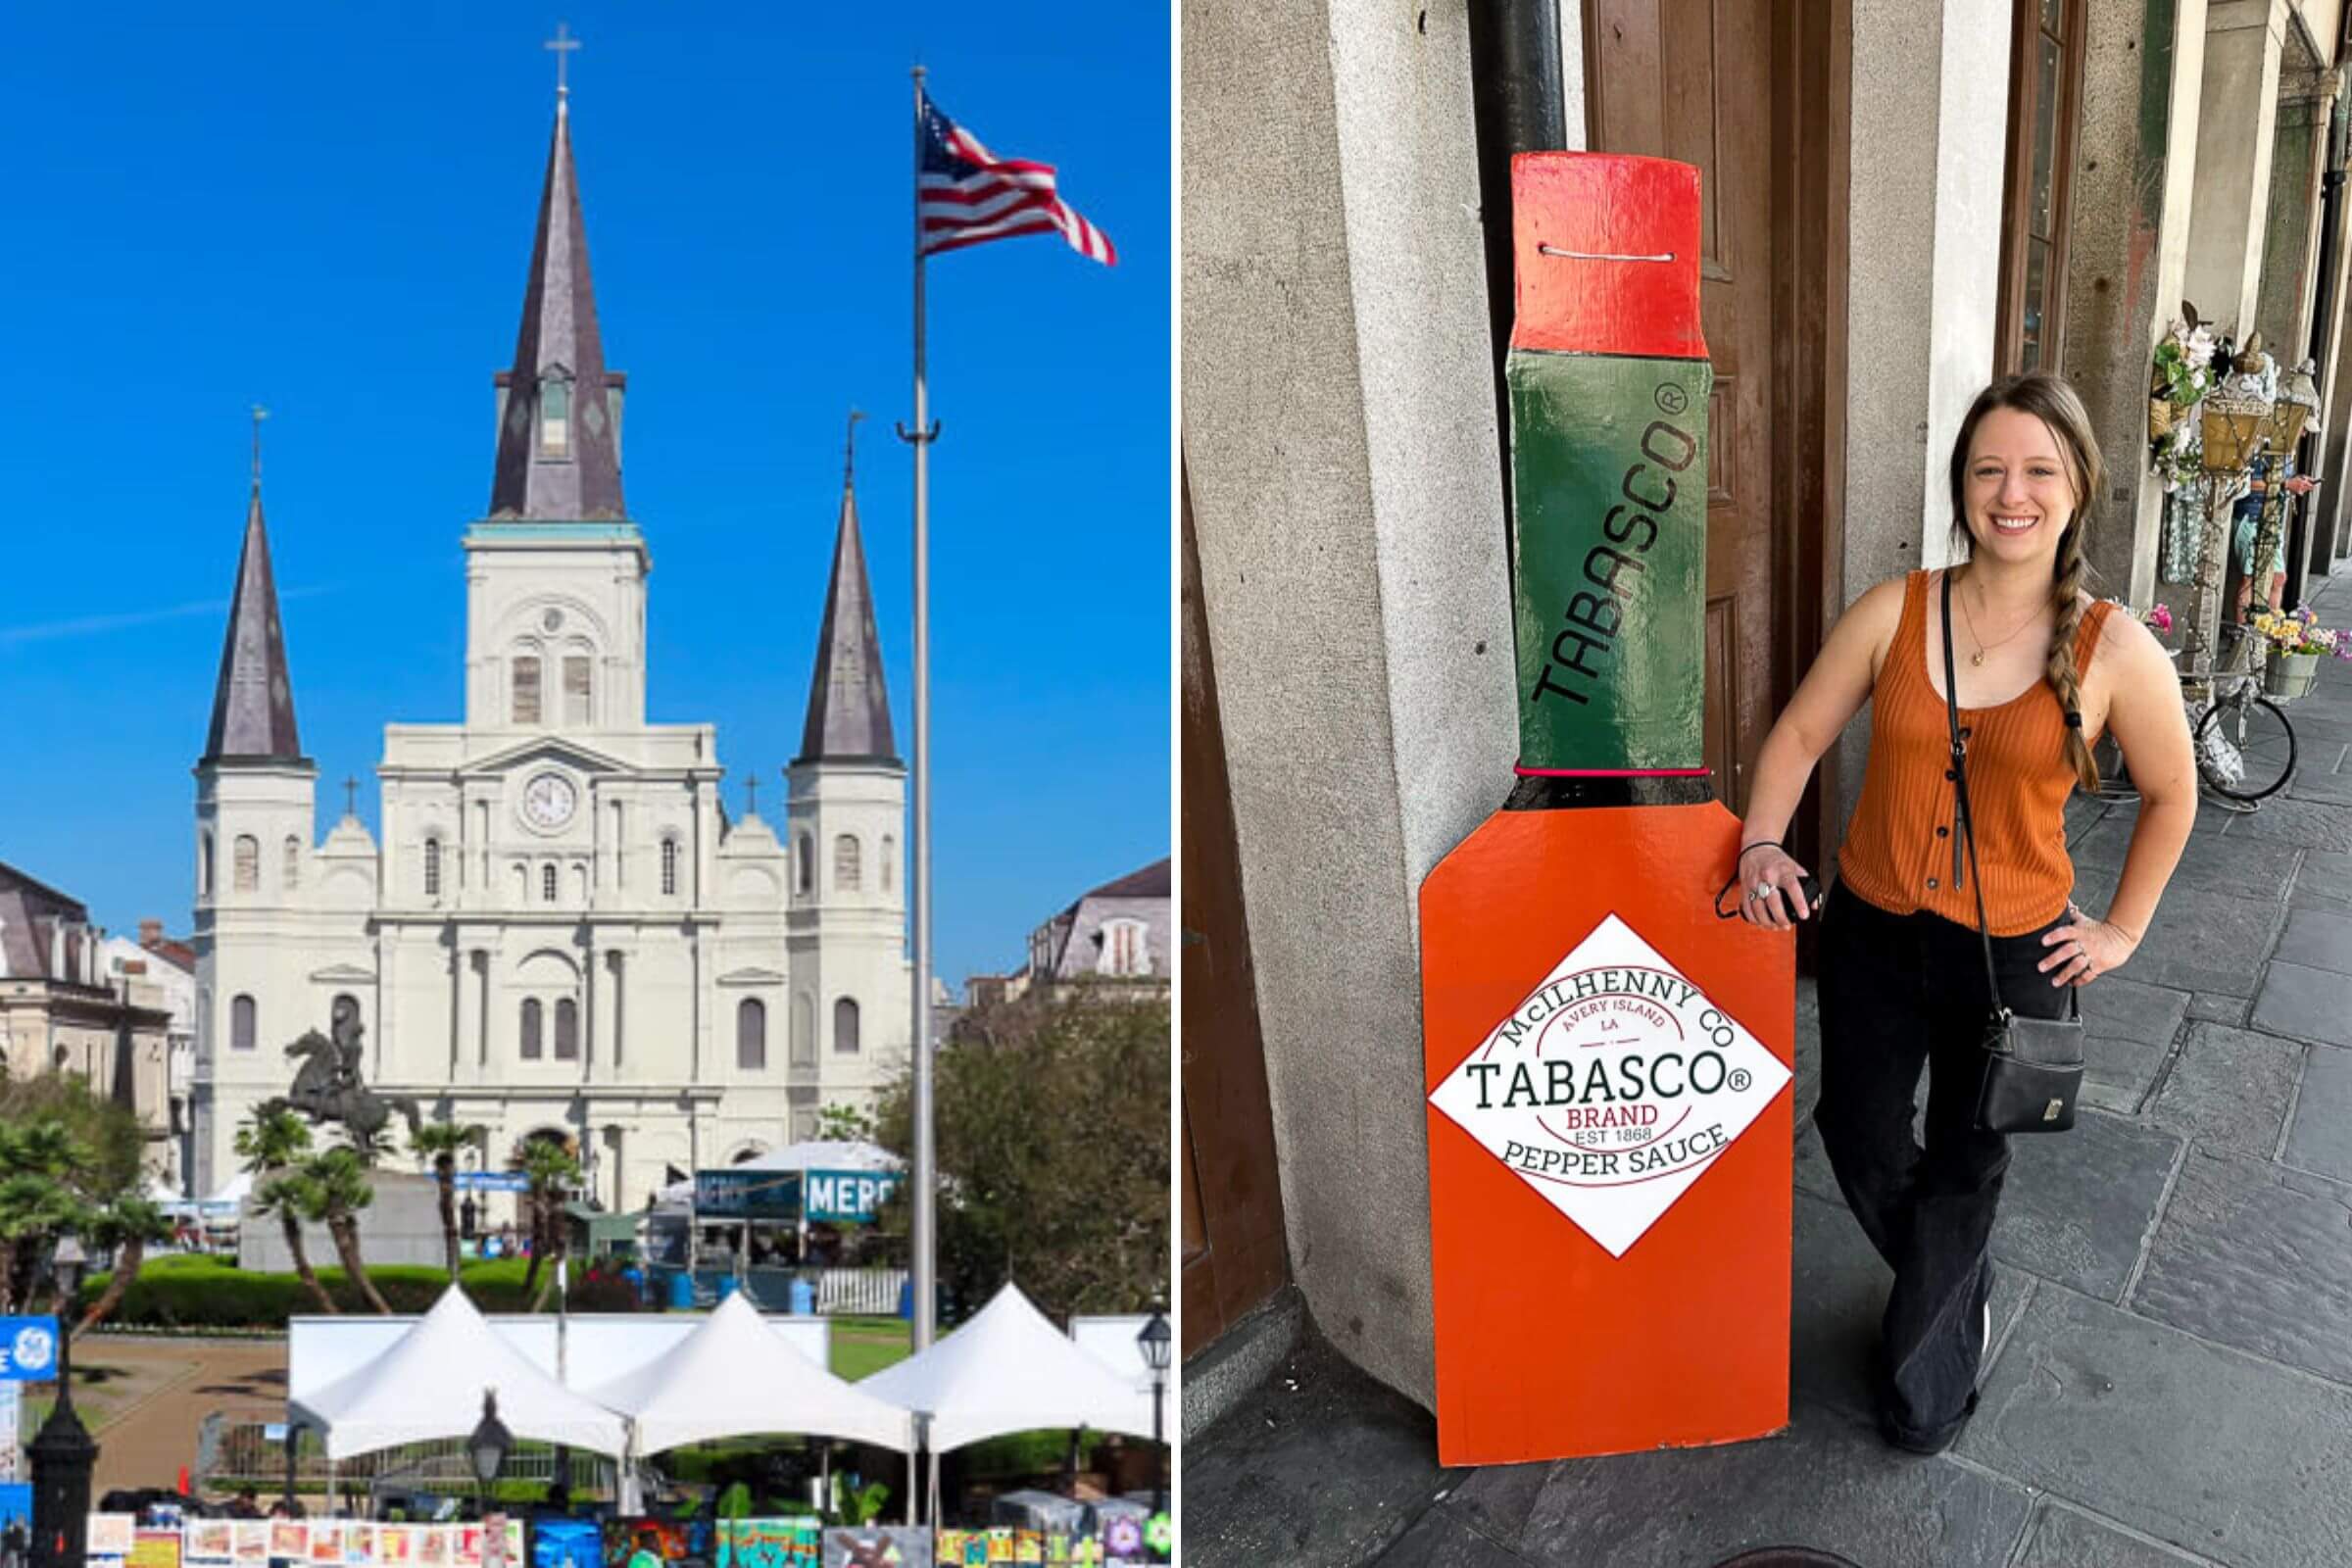 french quarter festival new orleans review